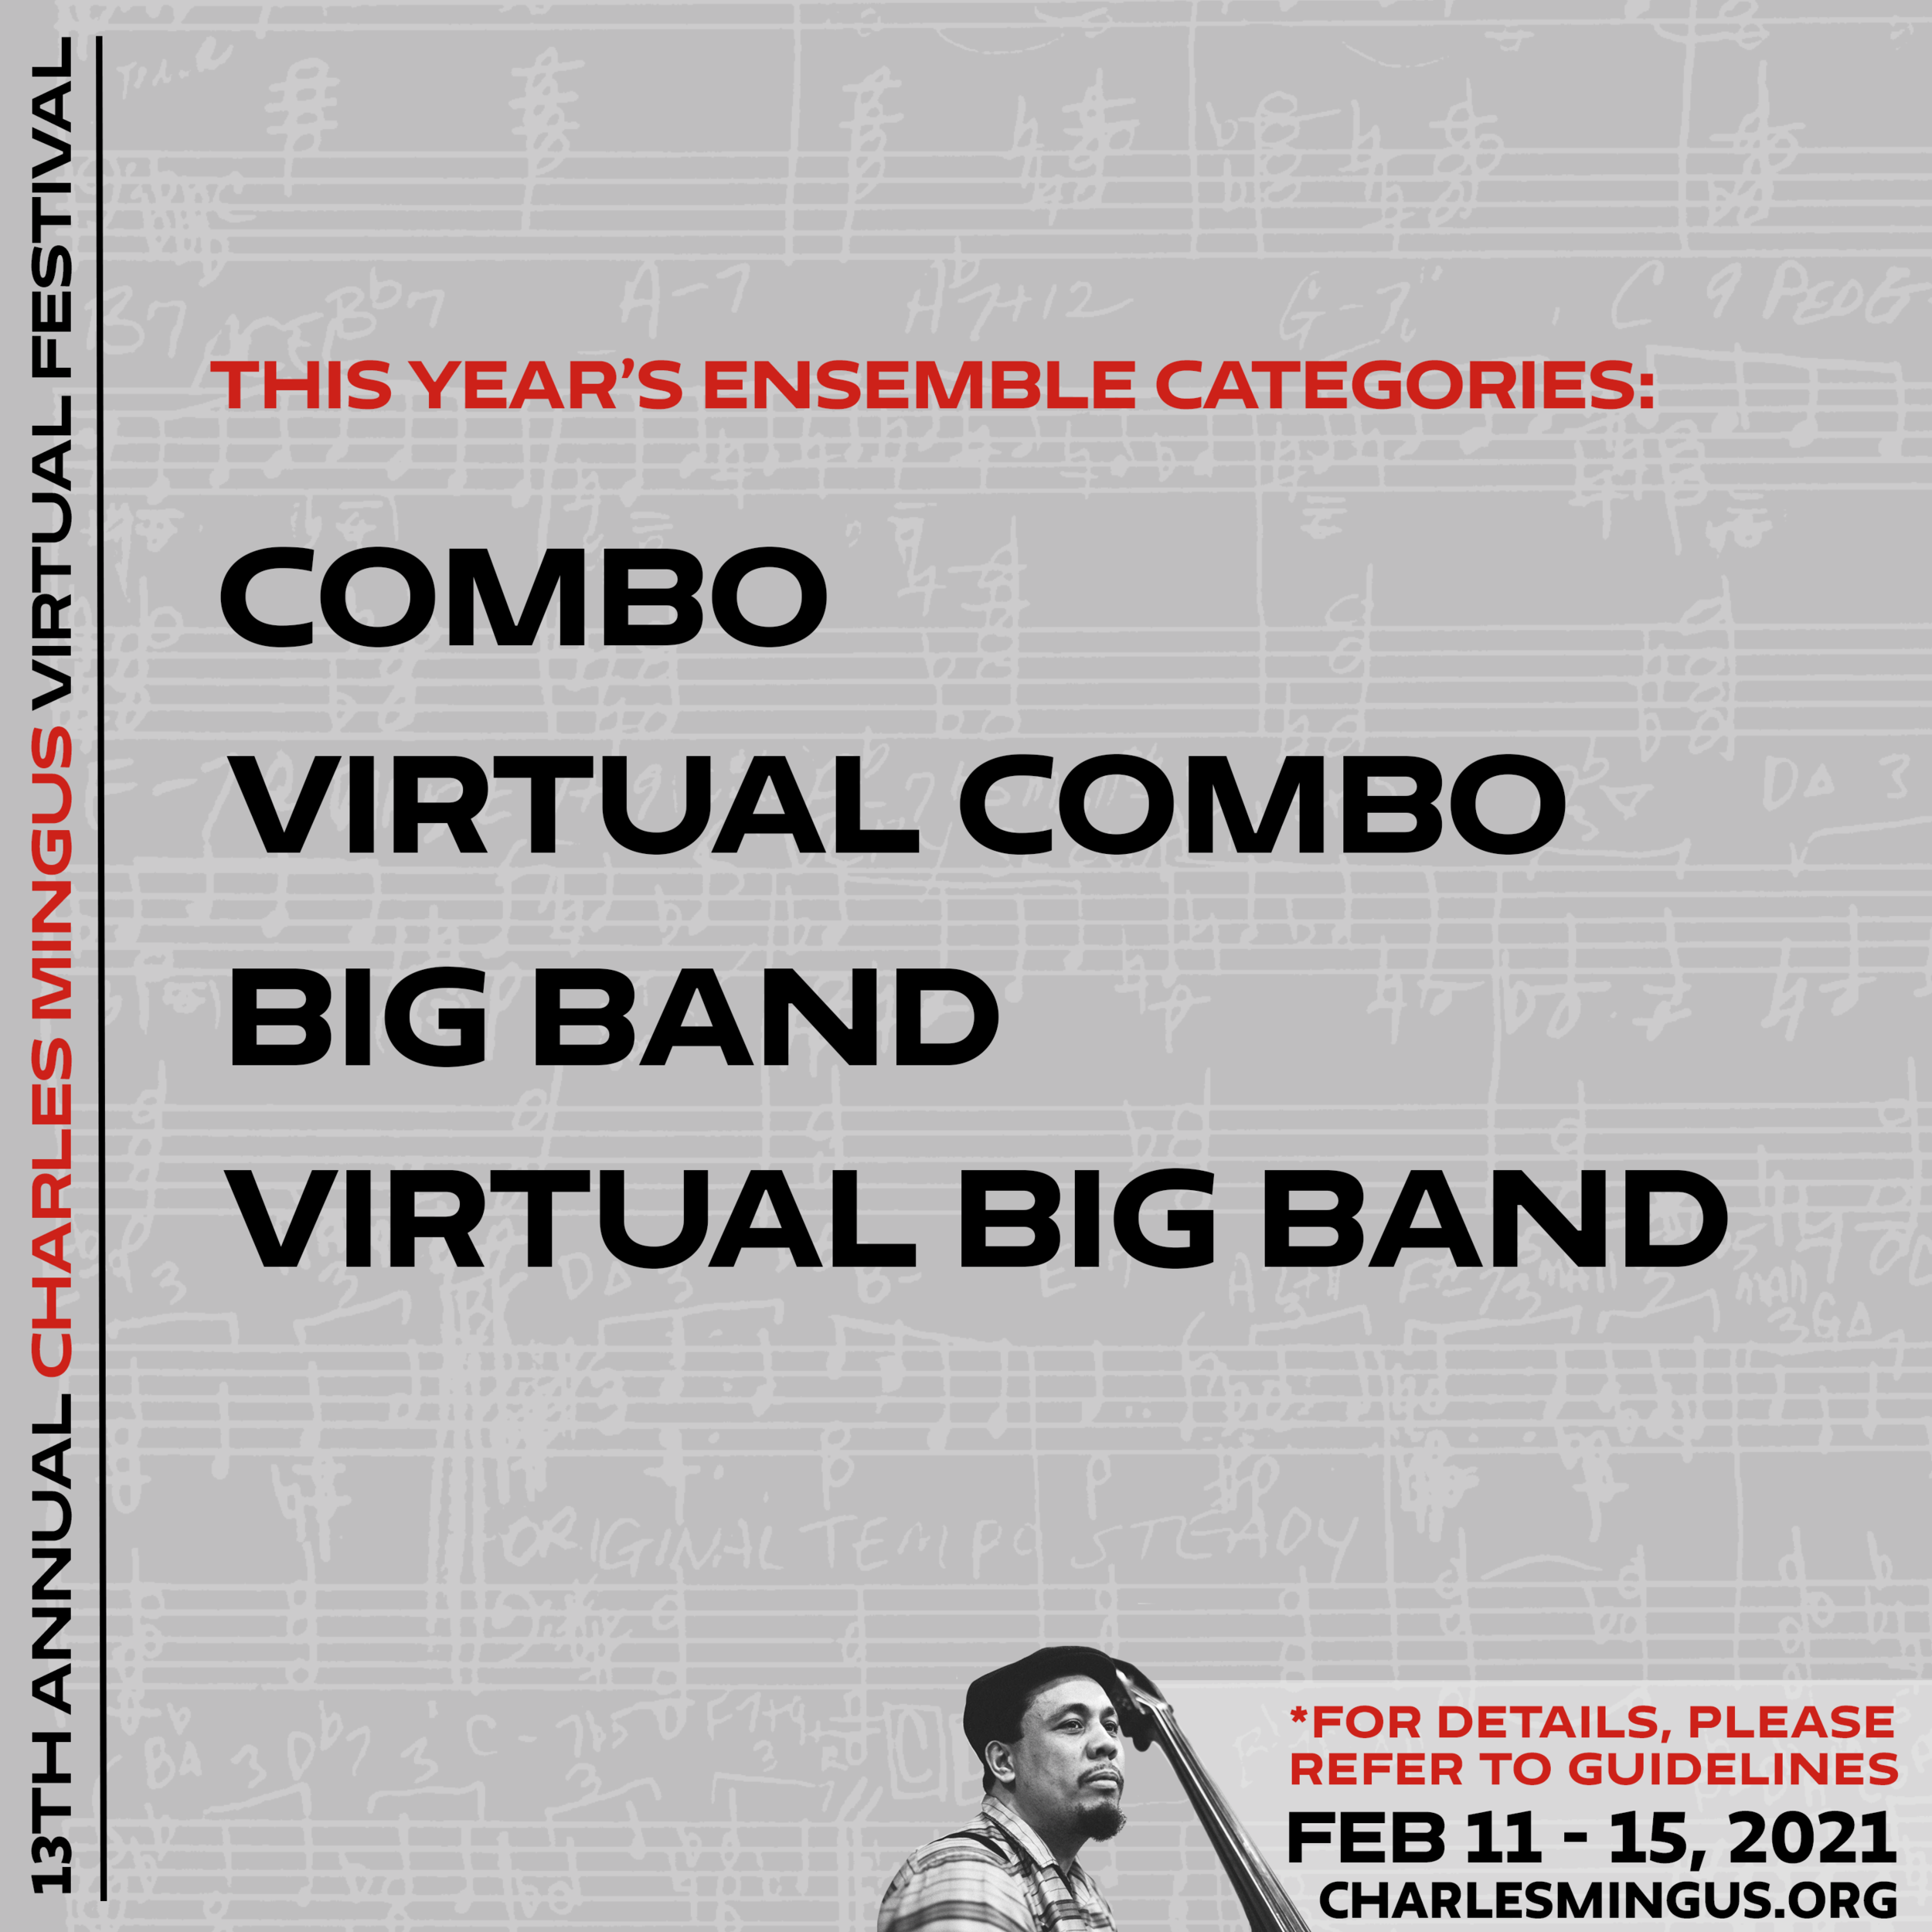 2-FINAL-MINGUS-FEST-2021-INSTA-CATEGORY-INFOGRAPHIC.png